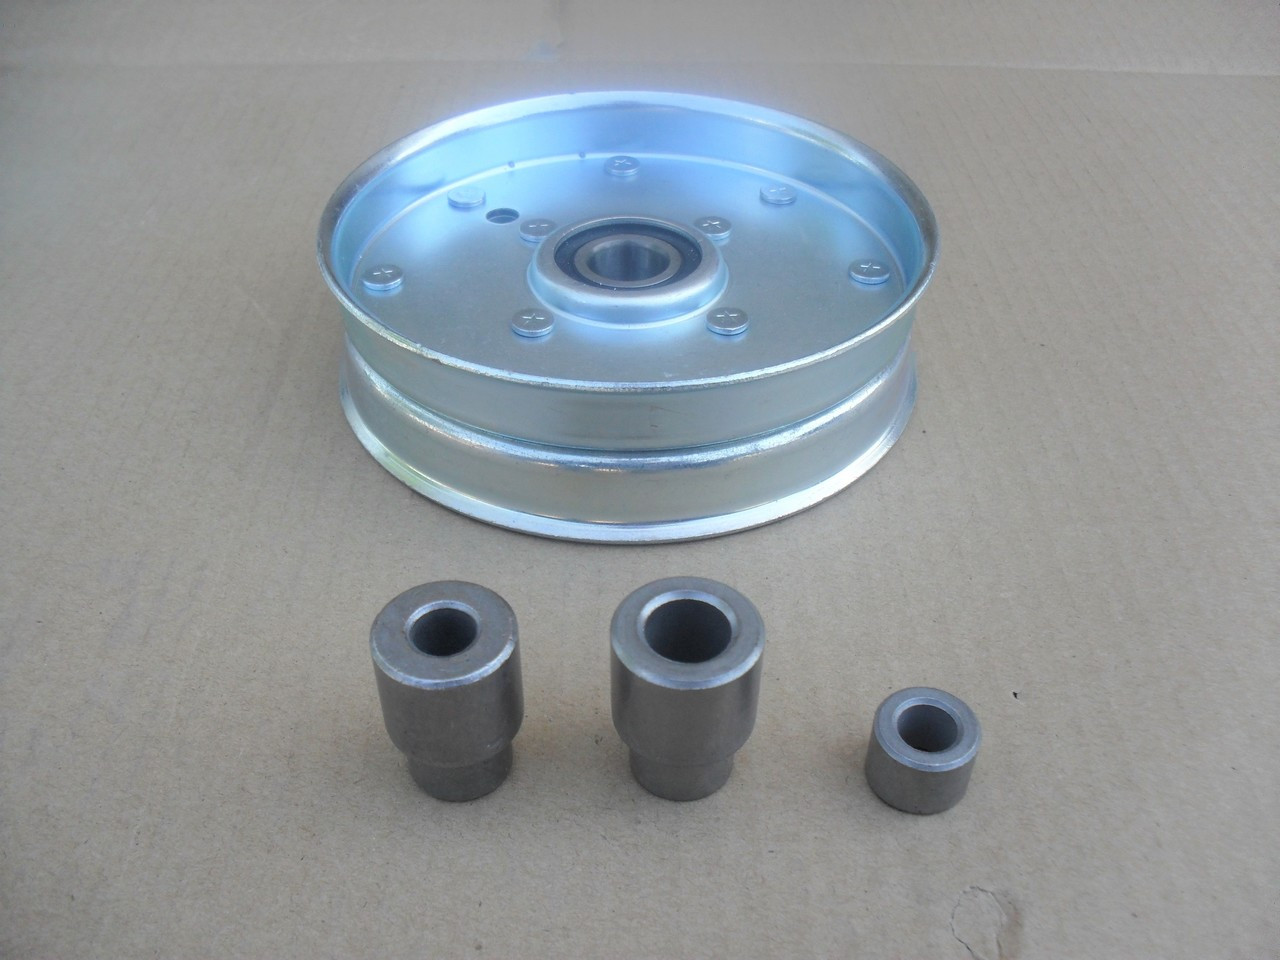 Flat Idler Pulley for Bunton PL8539A Height 1-7/16" ID 3/8" OD 5-1/4"